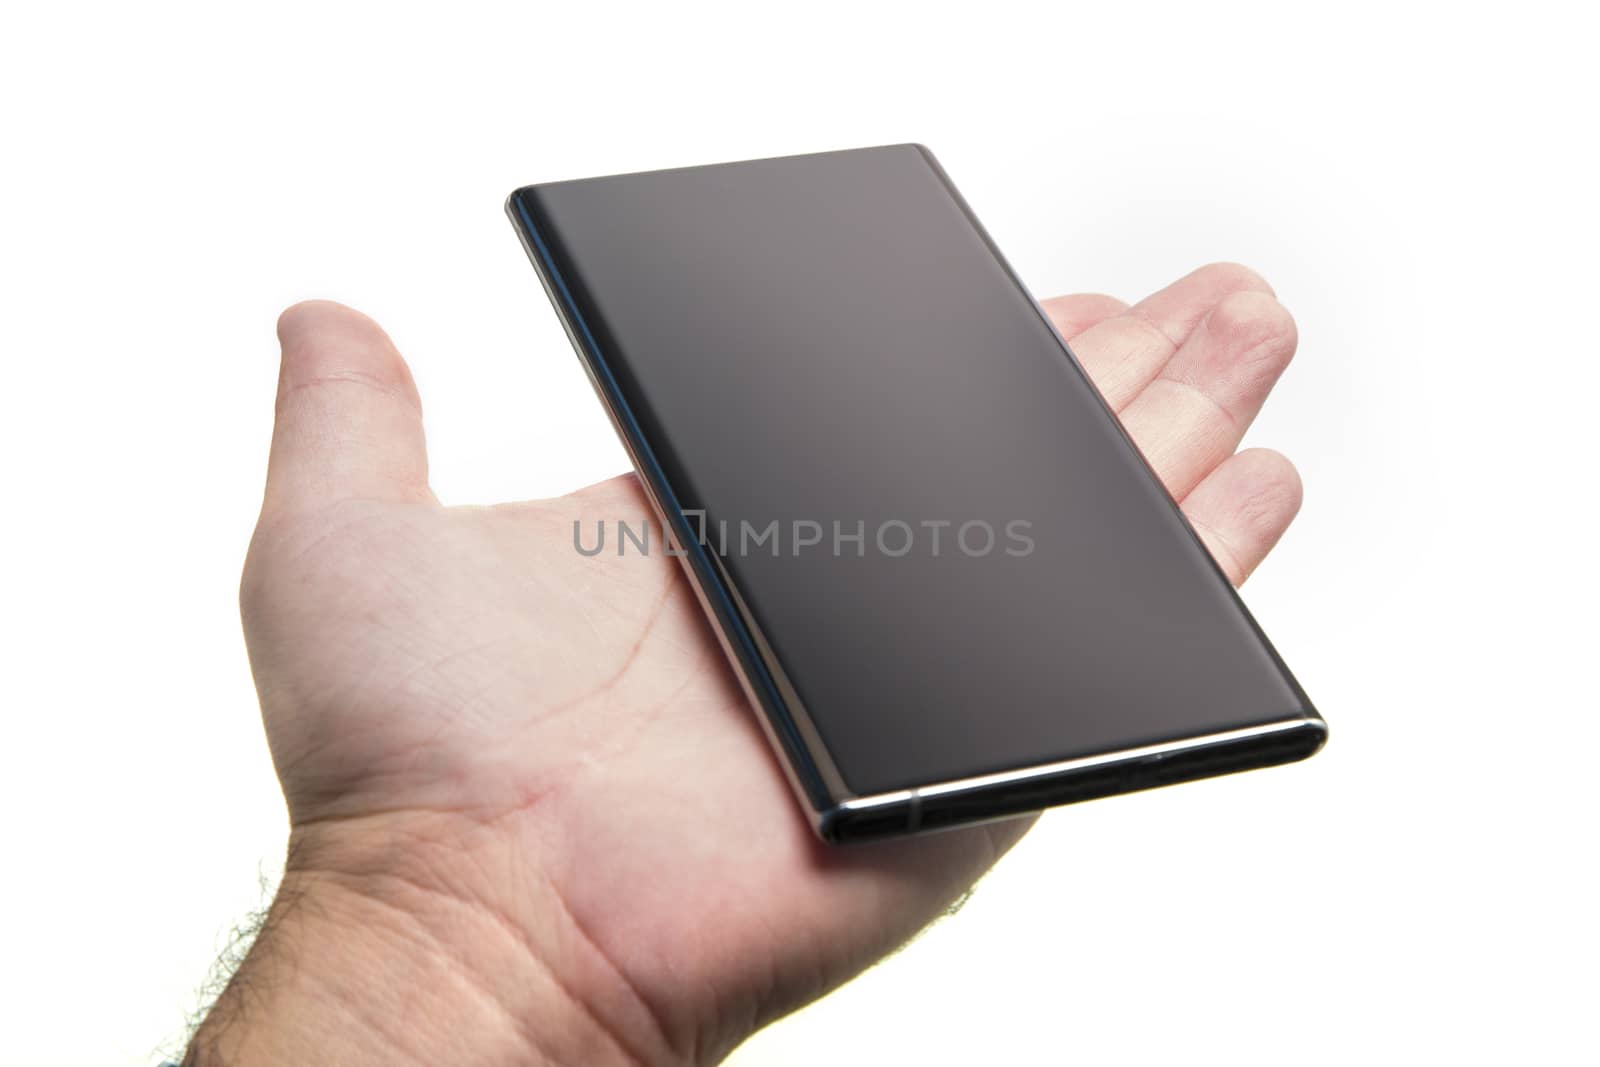 Generic smartphone held in hand by savcoco